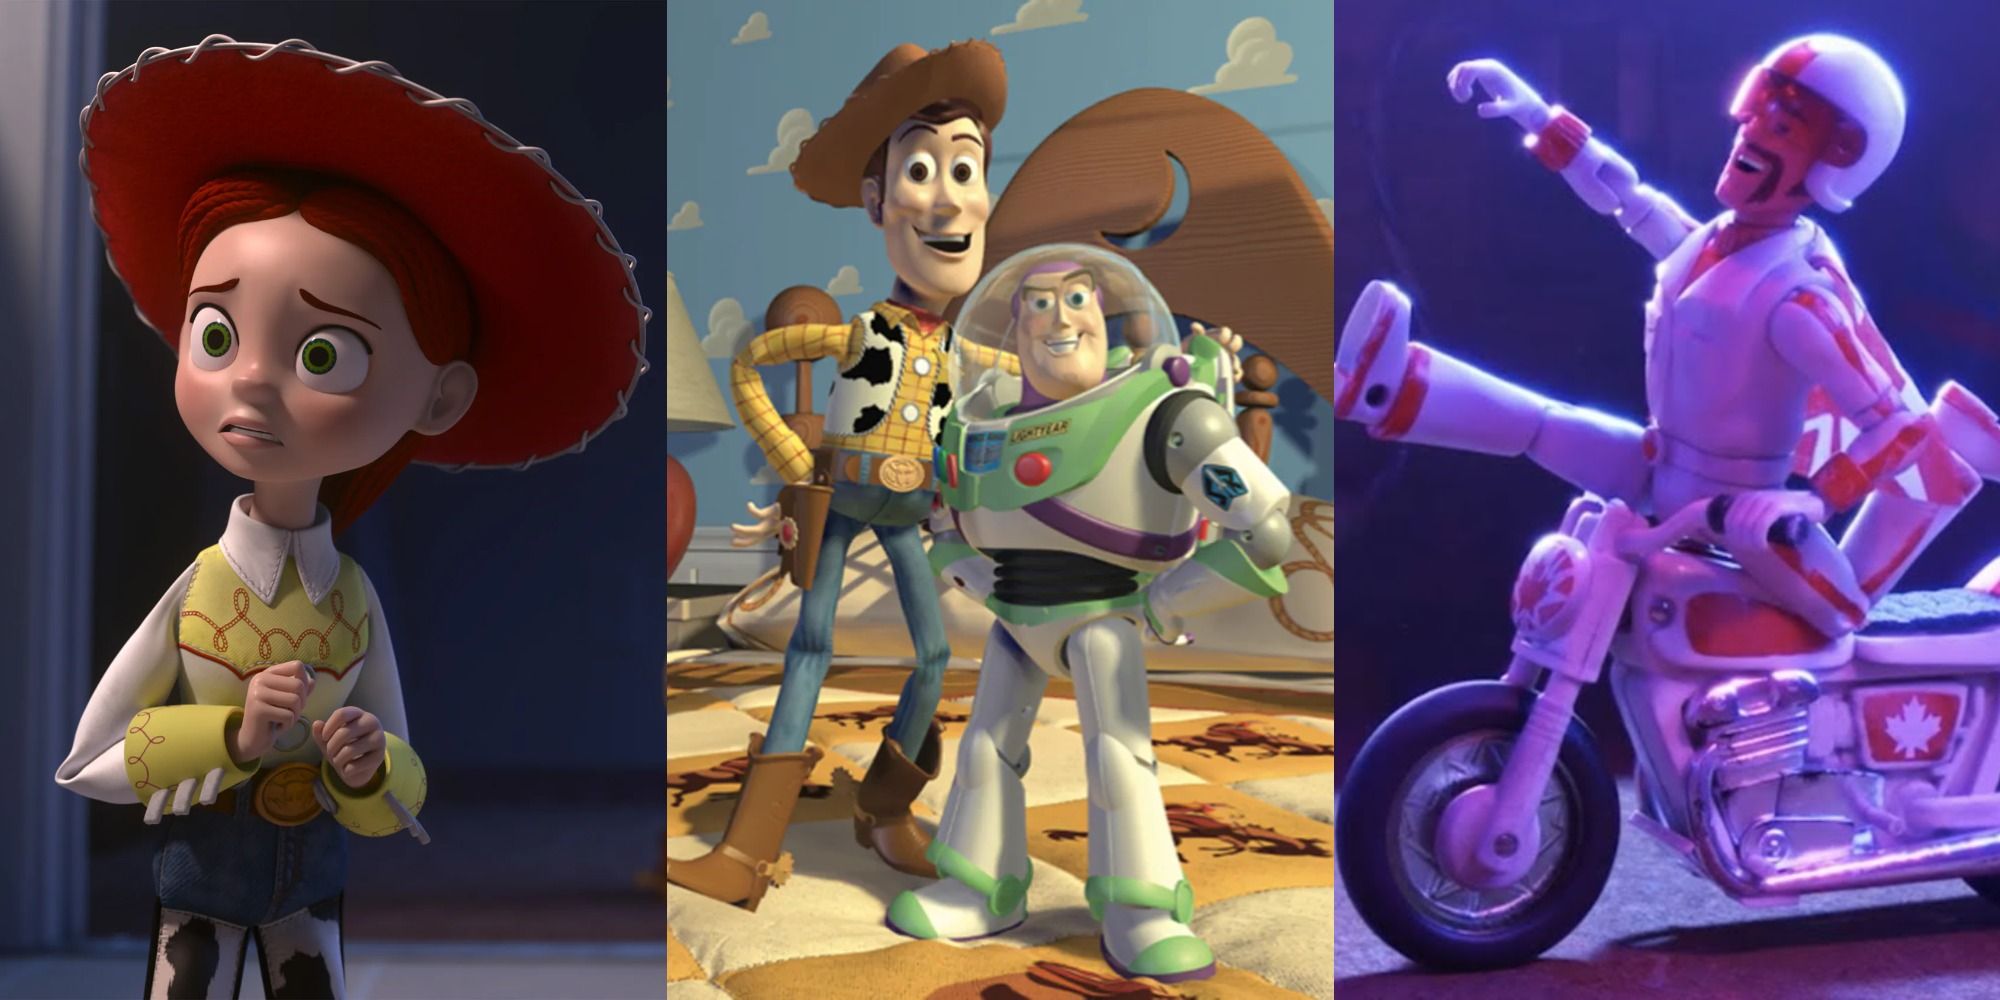 toy story characters pictures